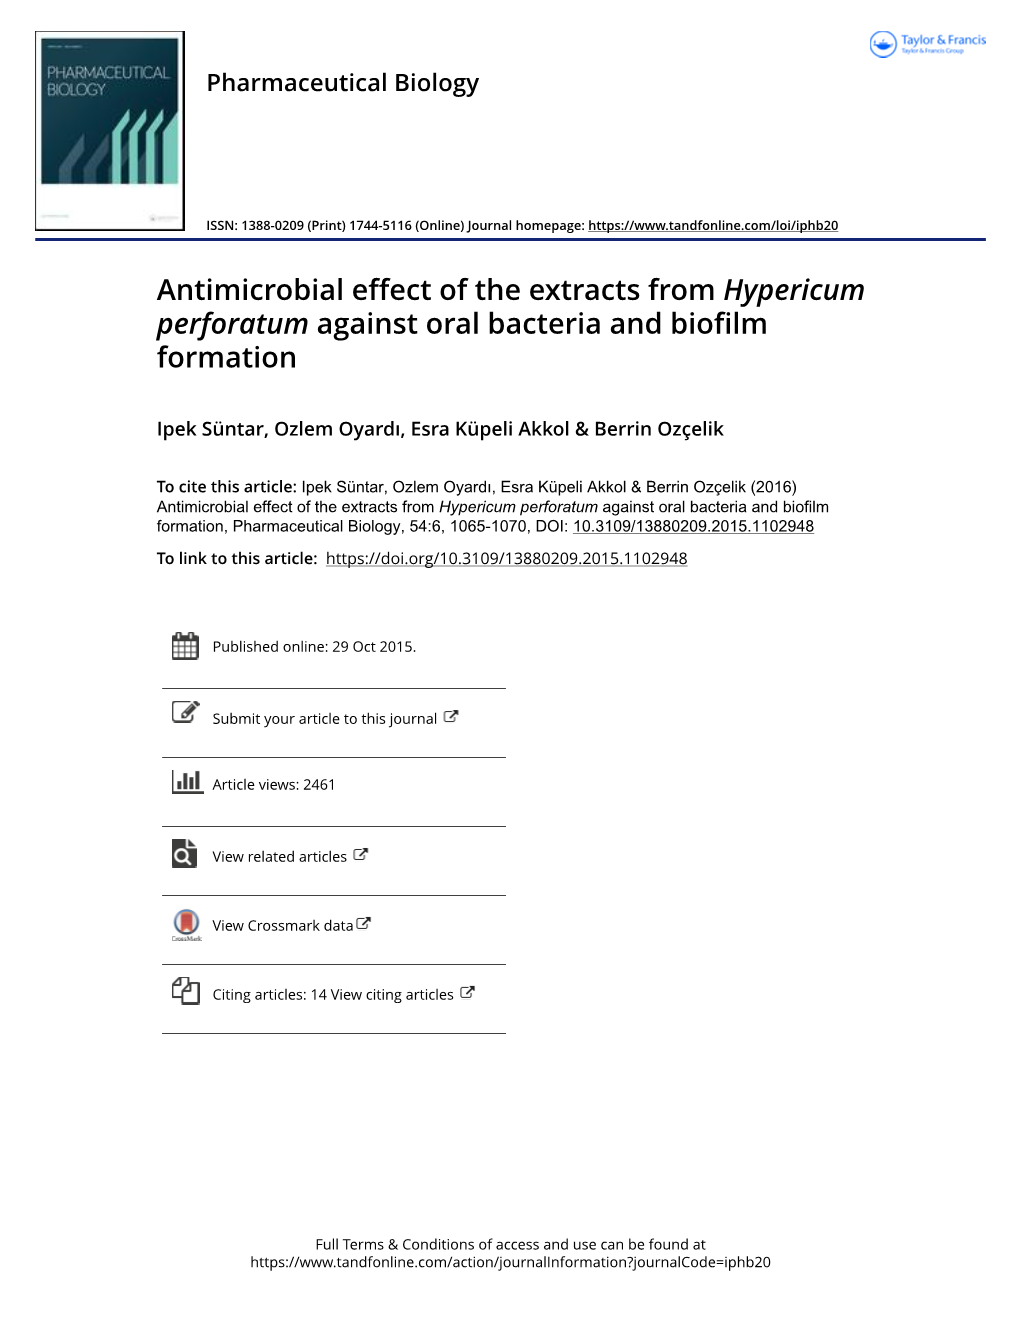 Antimicrobial Effect of the Extracts from Hypericum Perforatum Against Oral Bacteria and Biofilm Formation